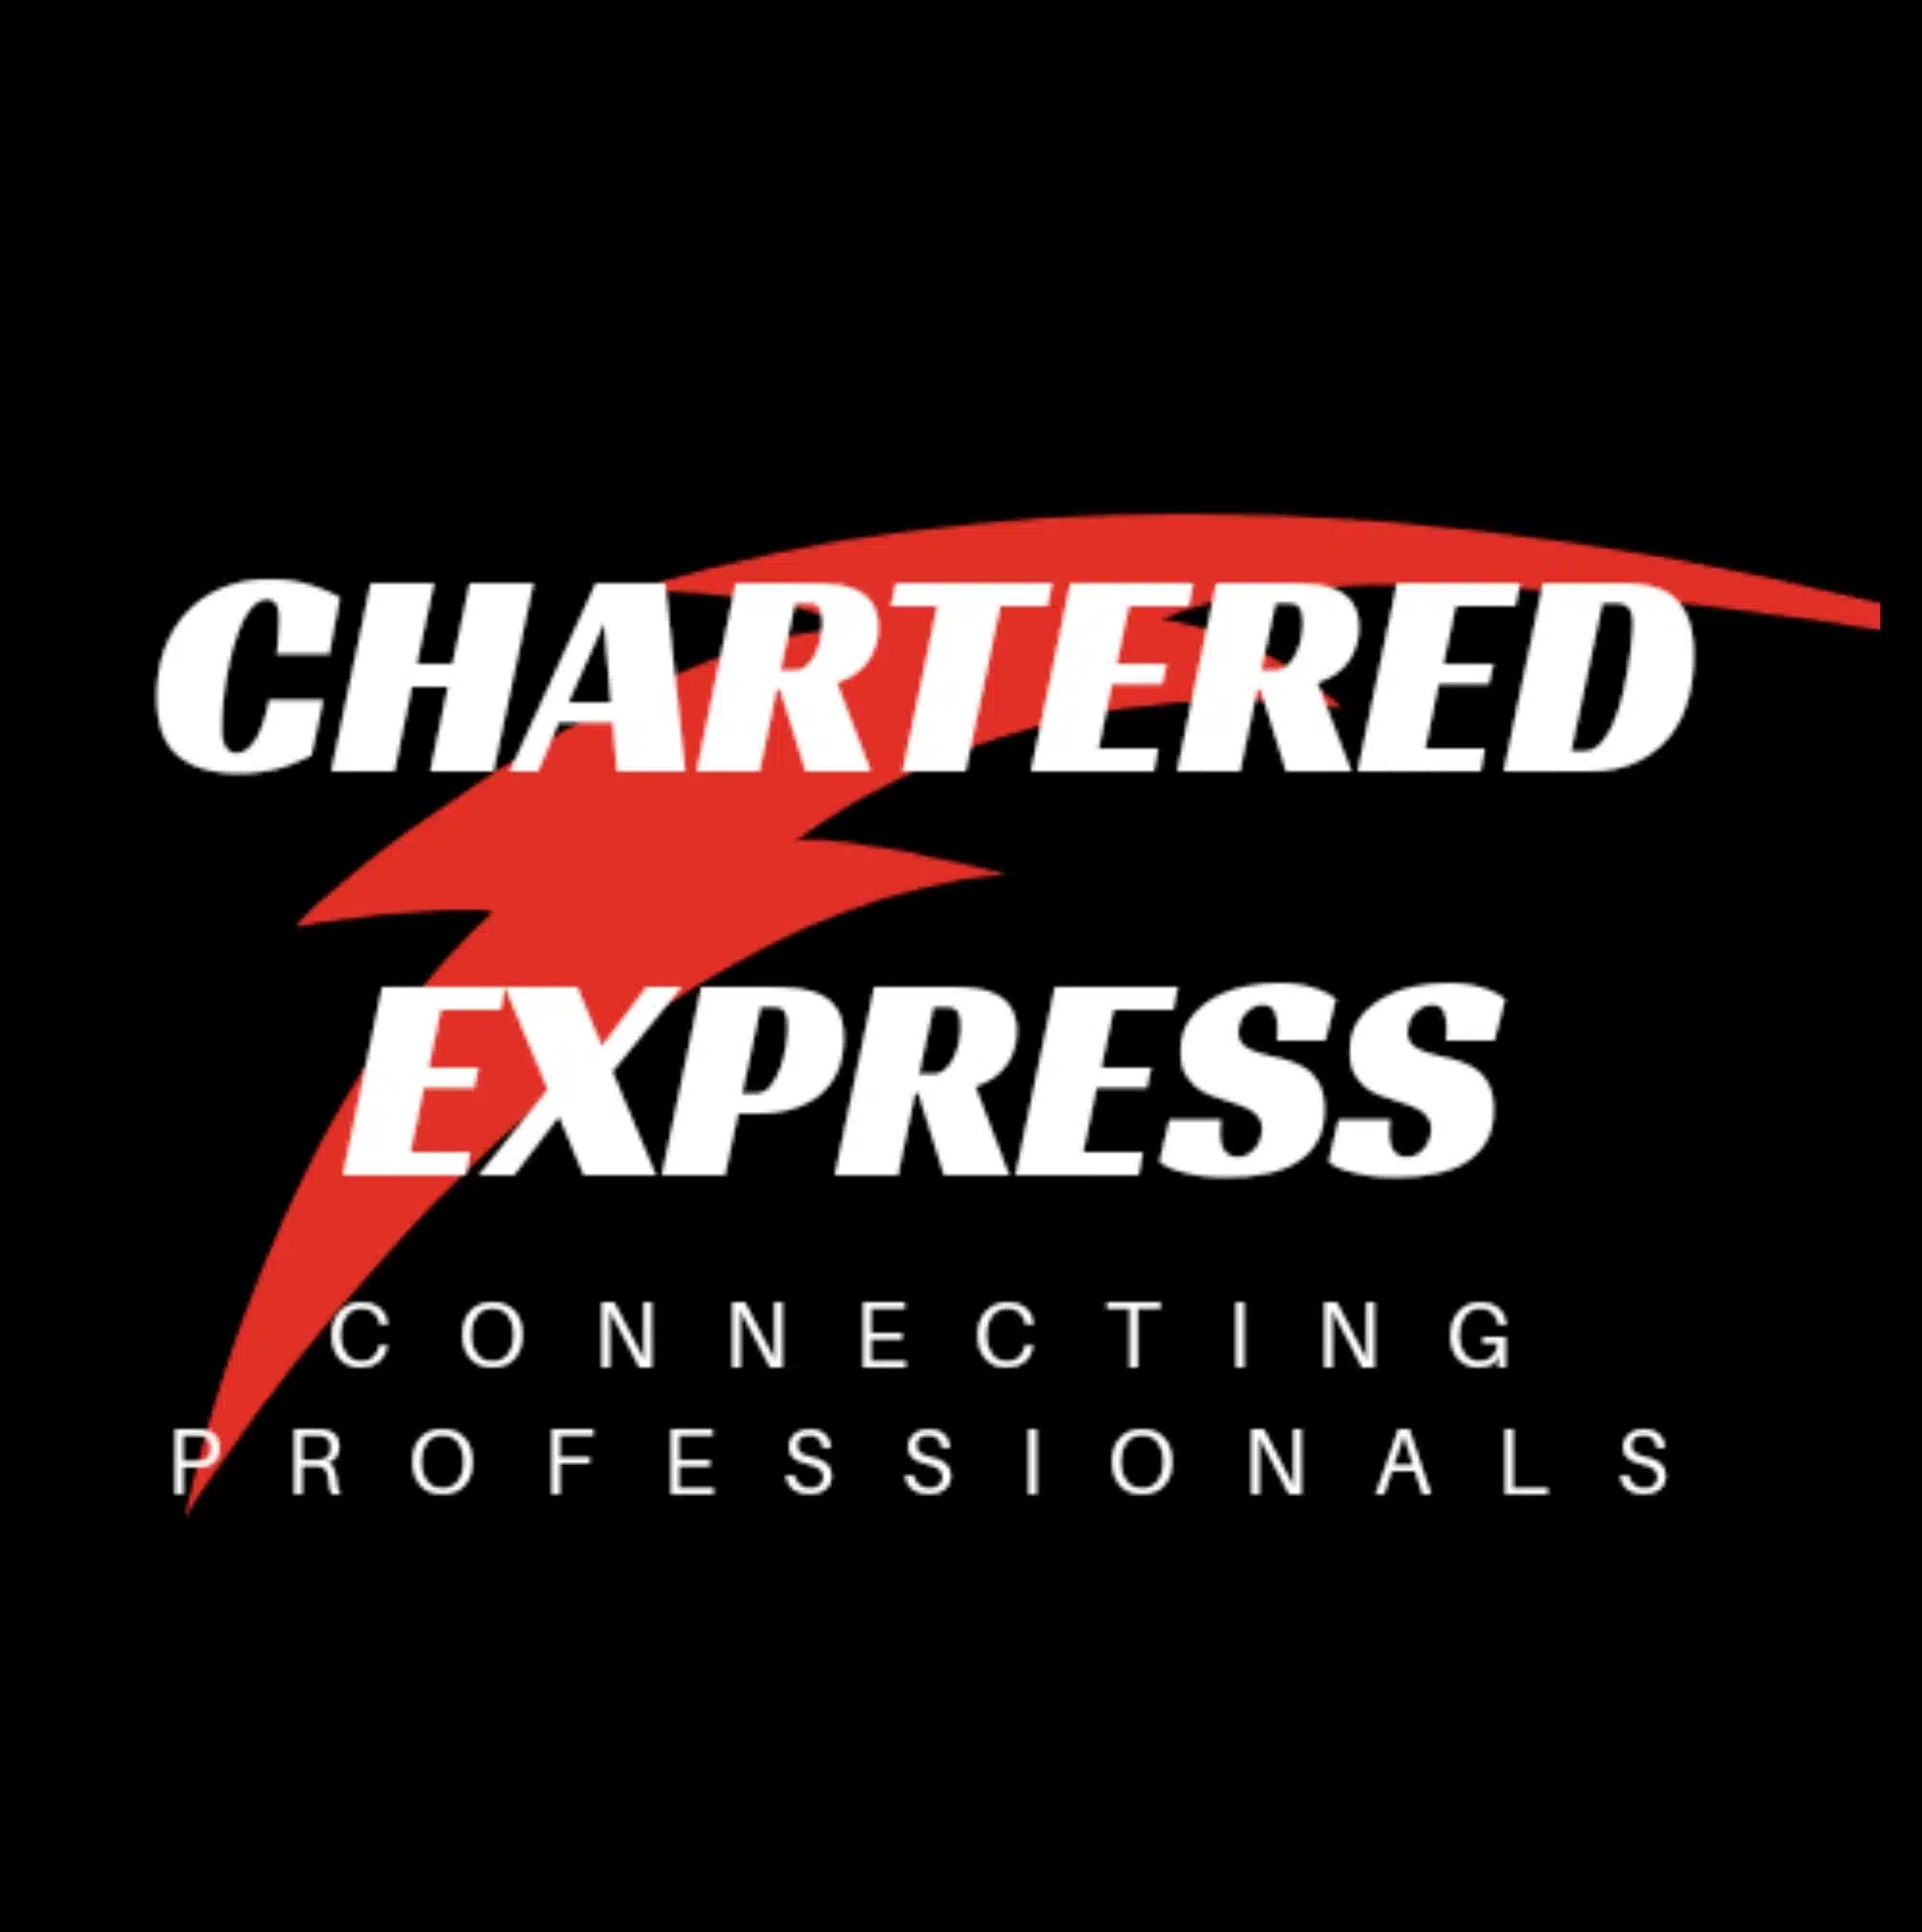 Chartered express official logo